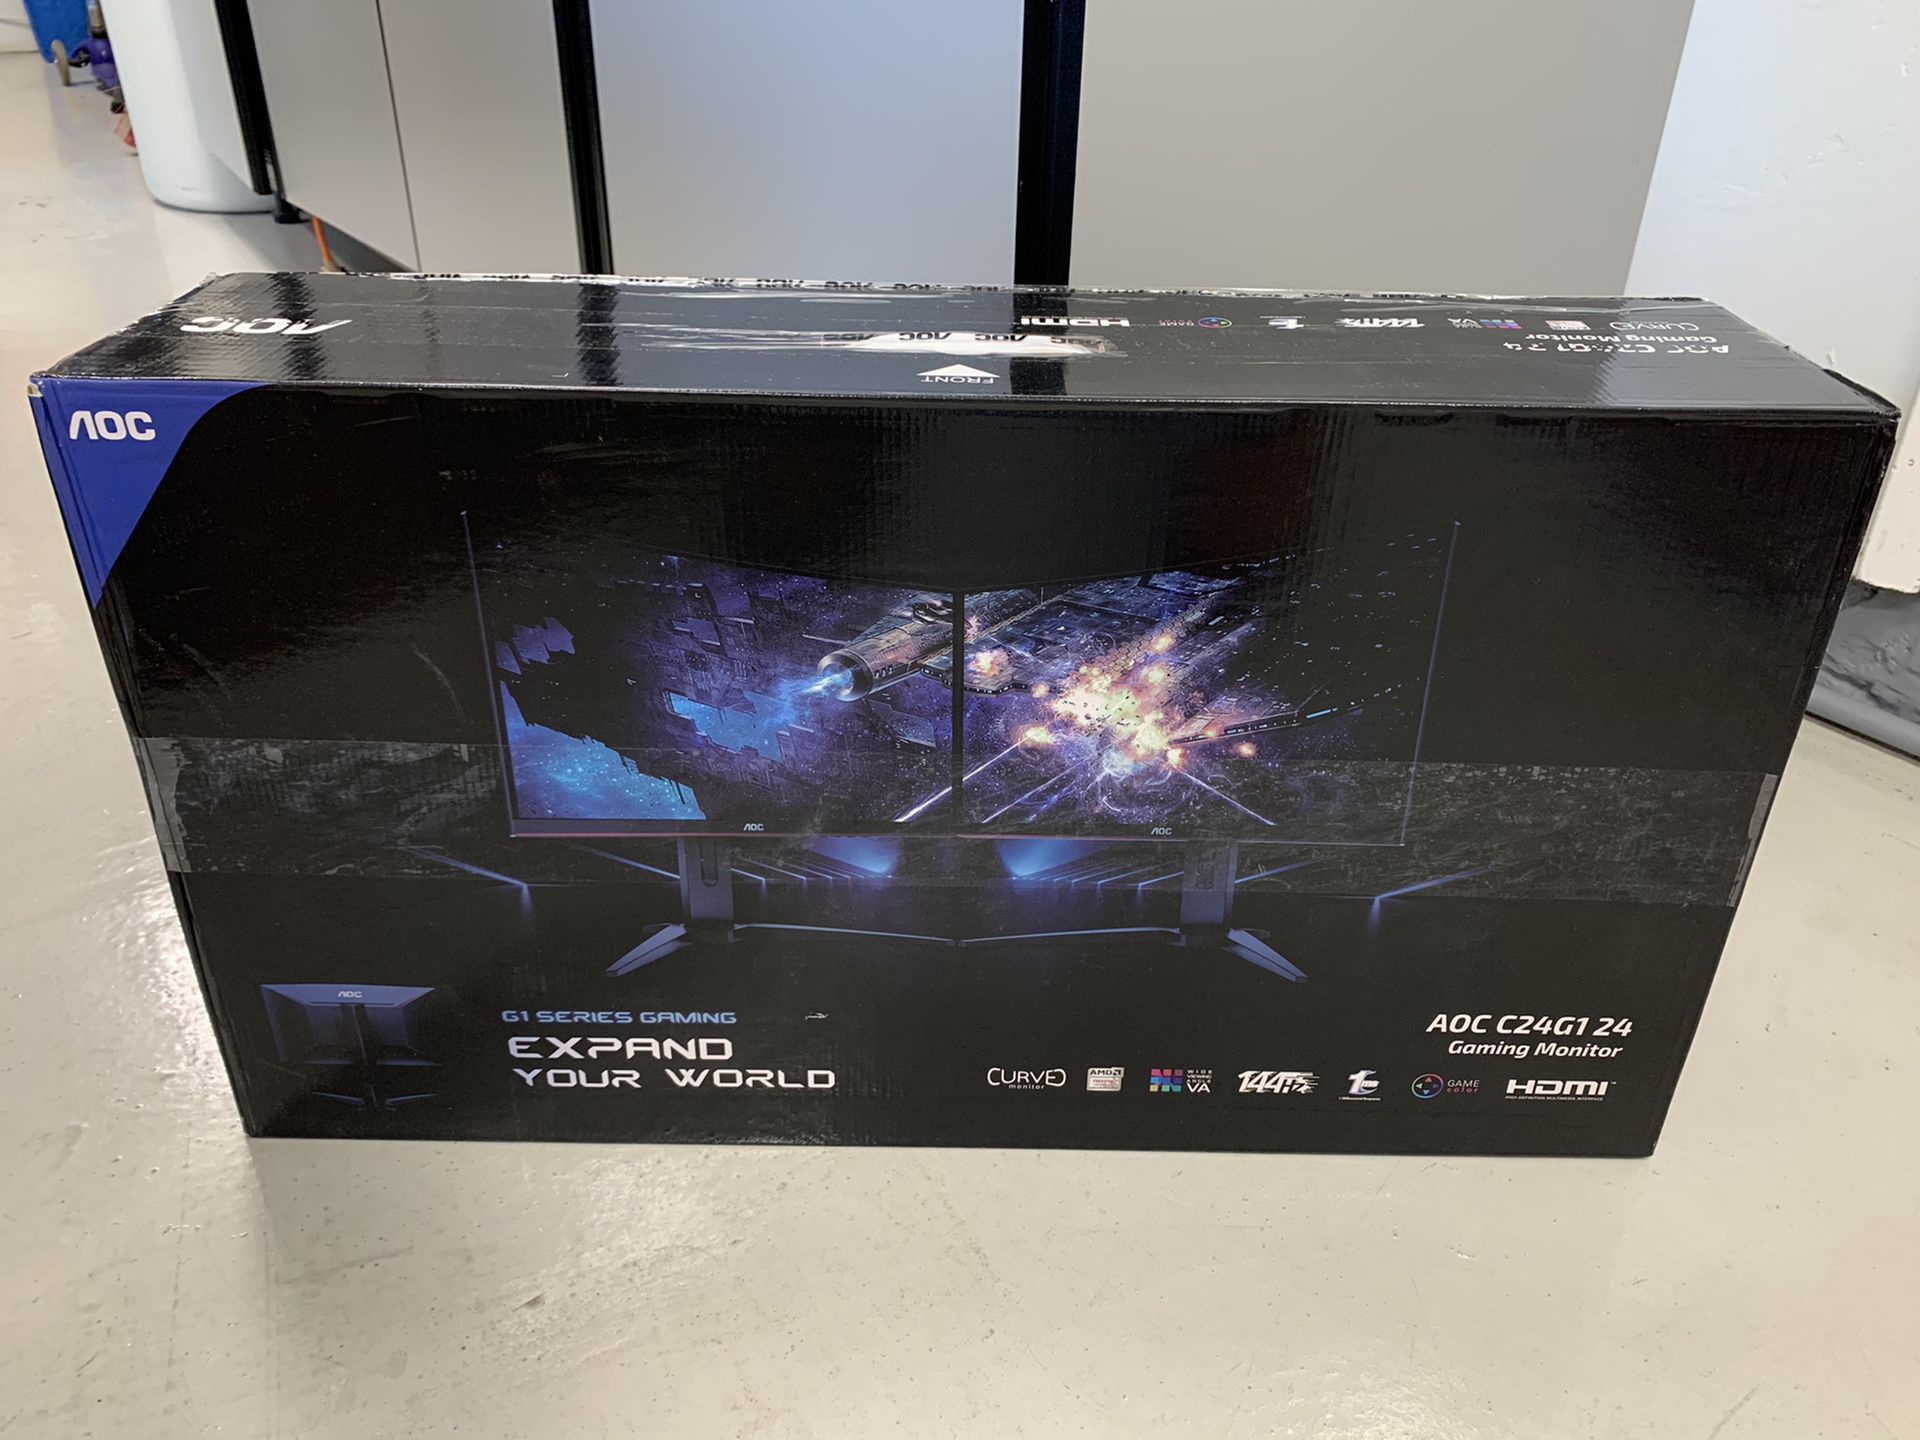 AOC C24G1 24" Curved Gaming Monitor FHD 1080p, 1ms 144Hz top 10 monitors for gamers- Brand new sealed in box